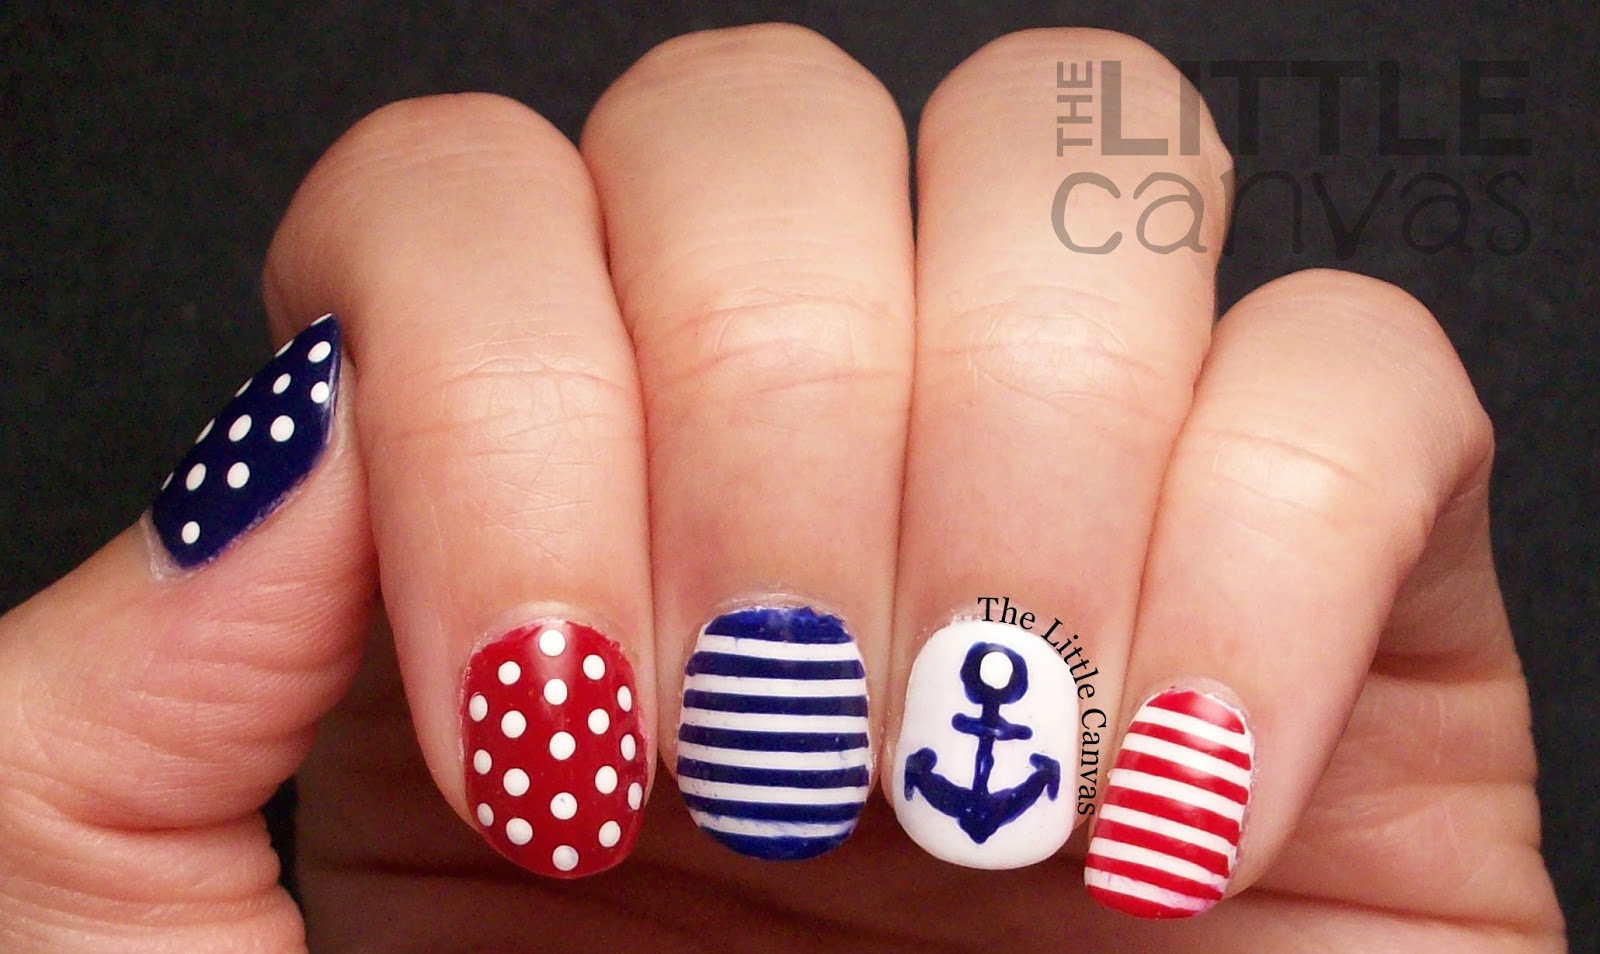 2. Nautical Nail Art with Stripes and Anchors - wide 1